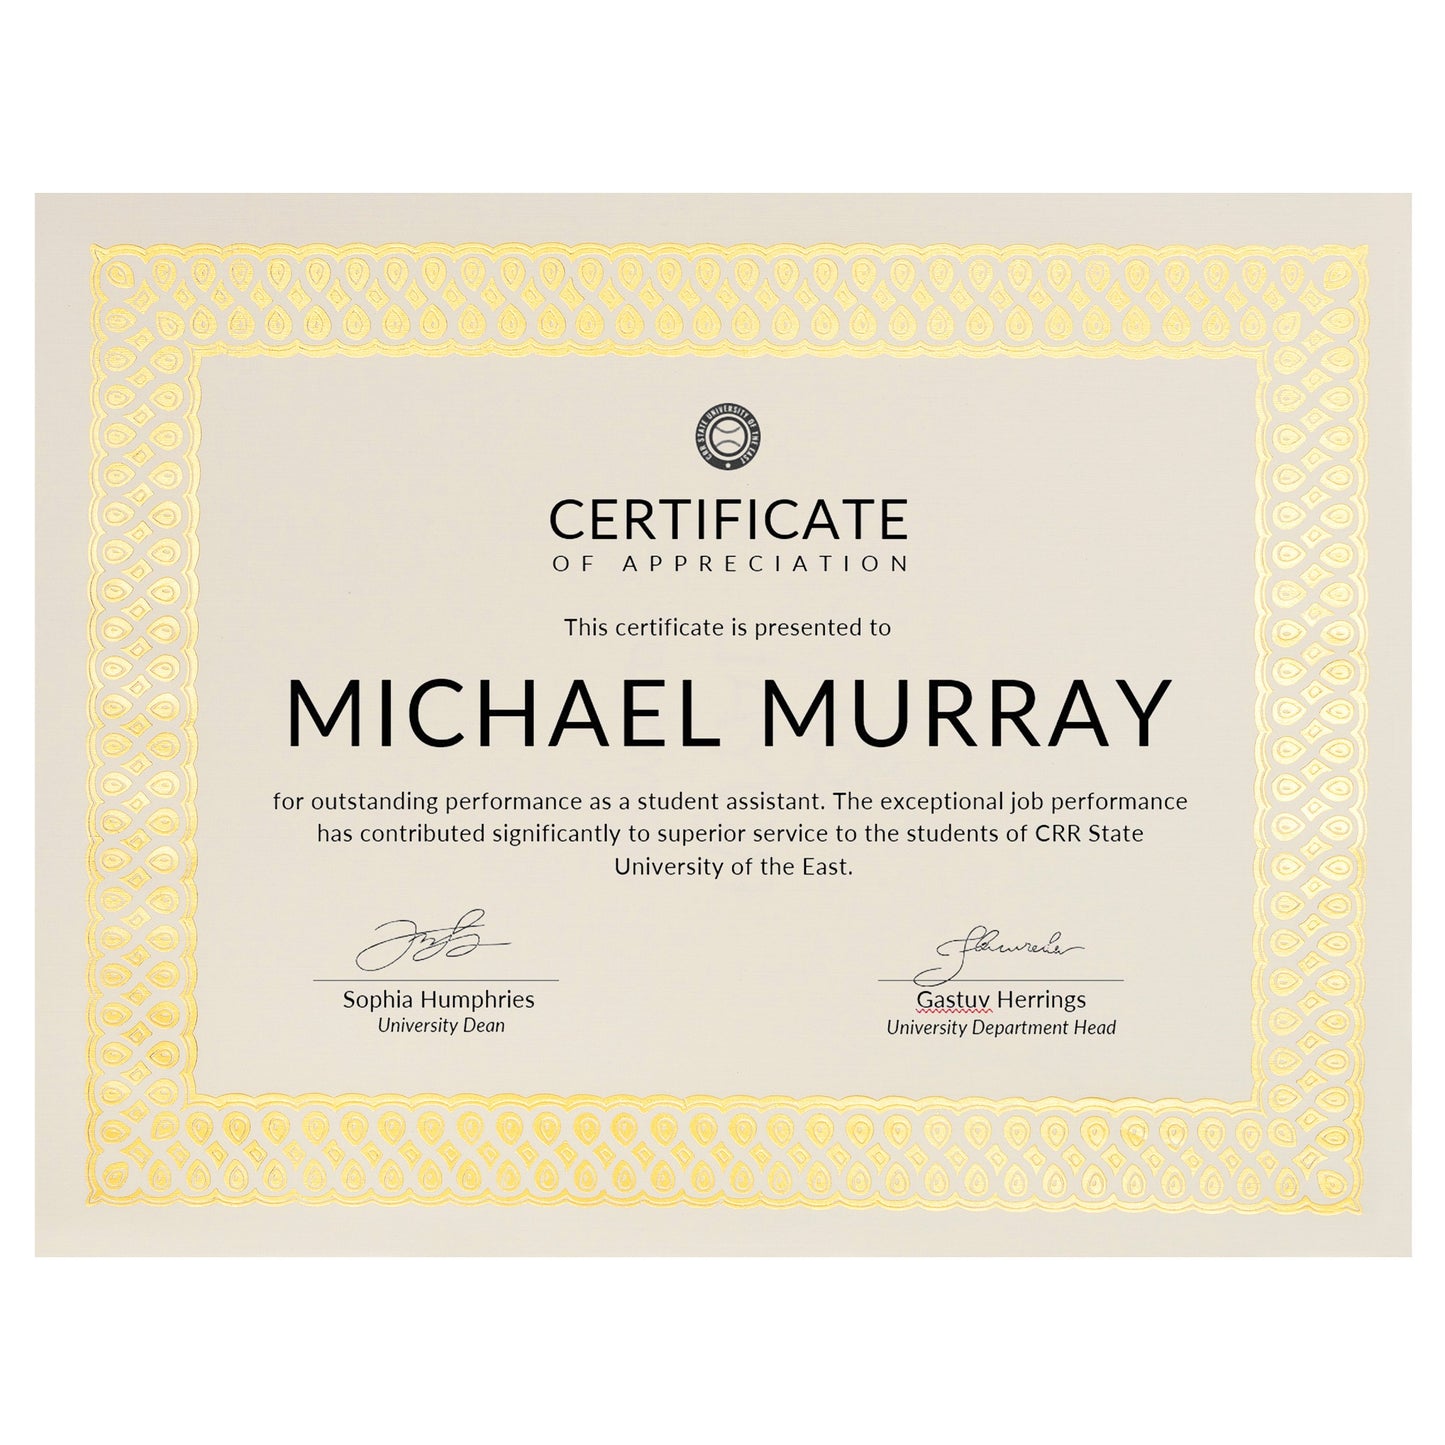 St. James® Elite™ Certificates, Natural Linen with Classic Gold Foil Design, Pack of 12